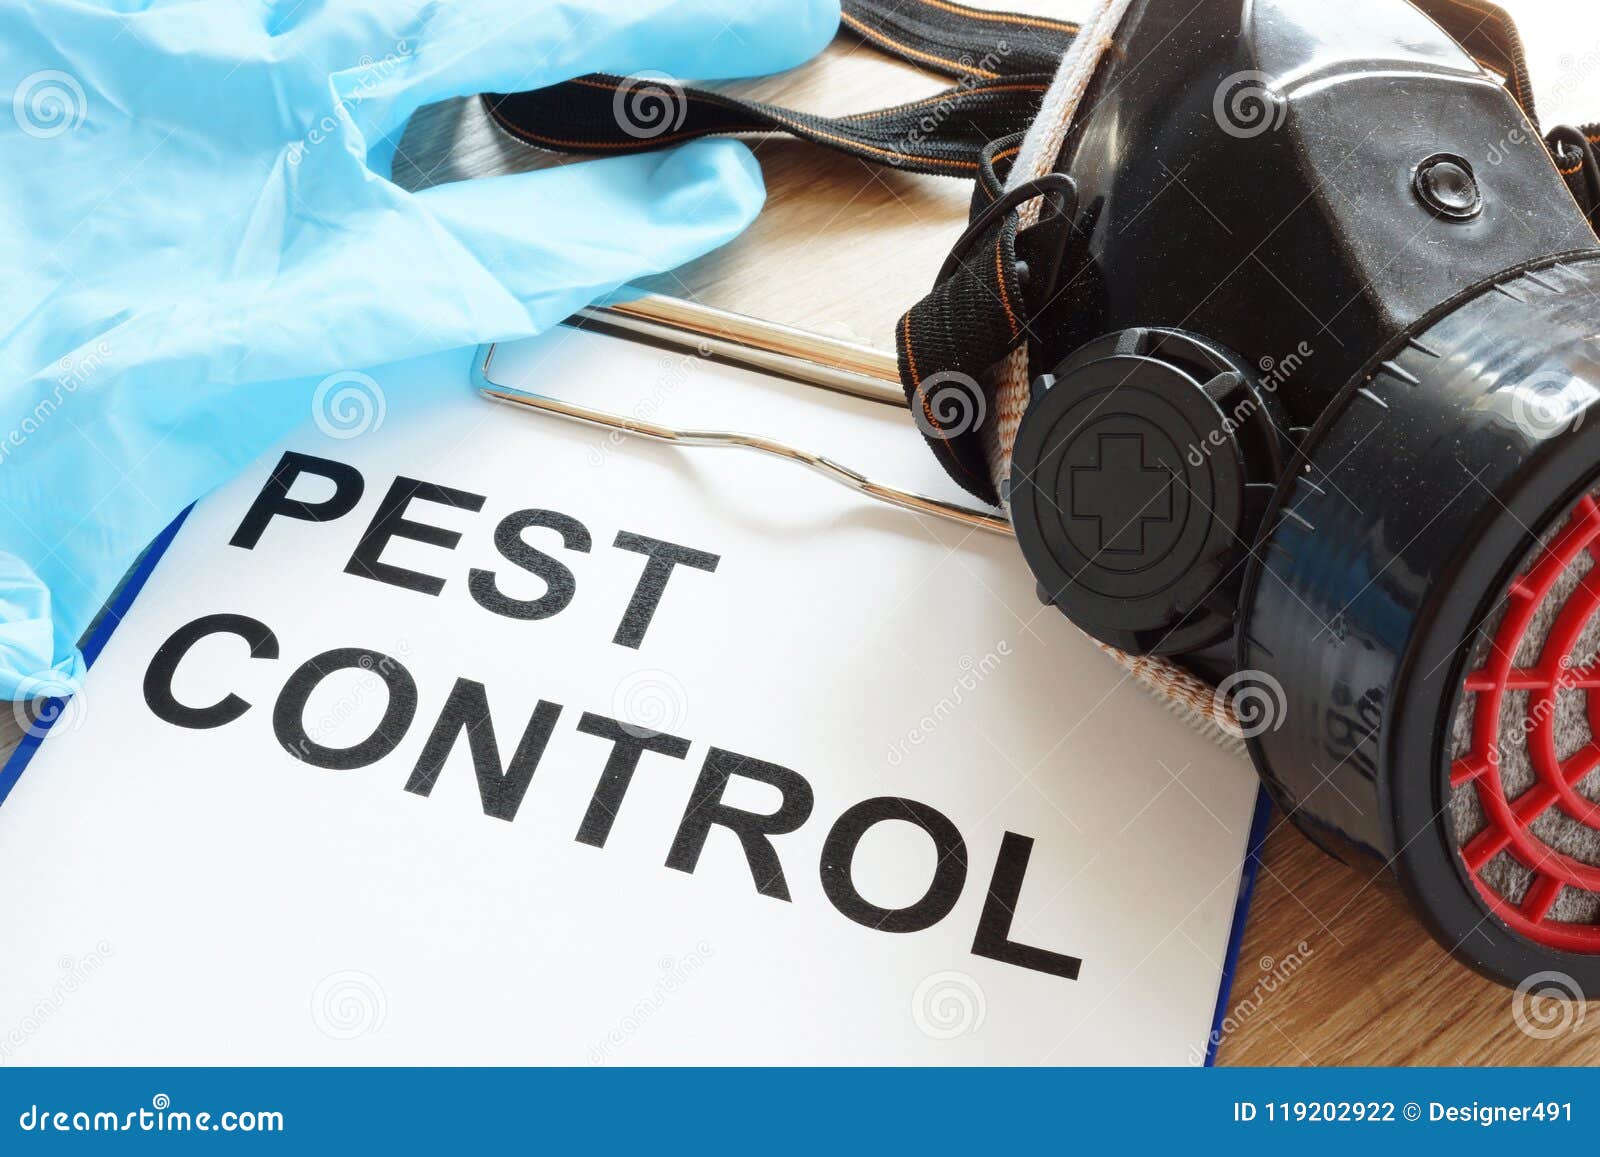 pest control. clipboard, respirator and gloves.